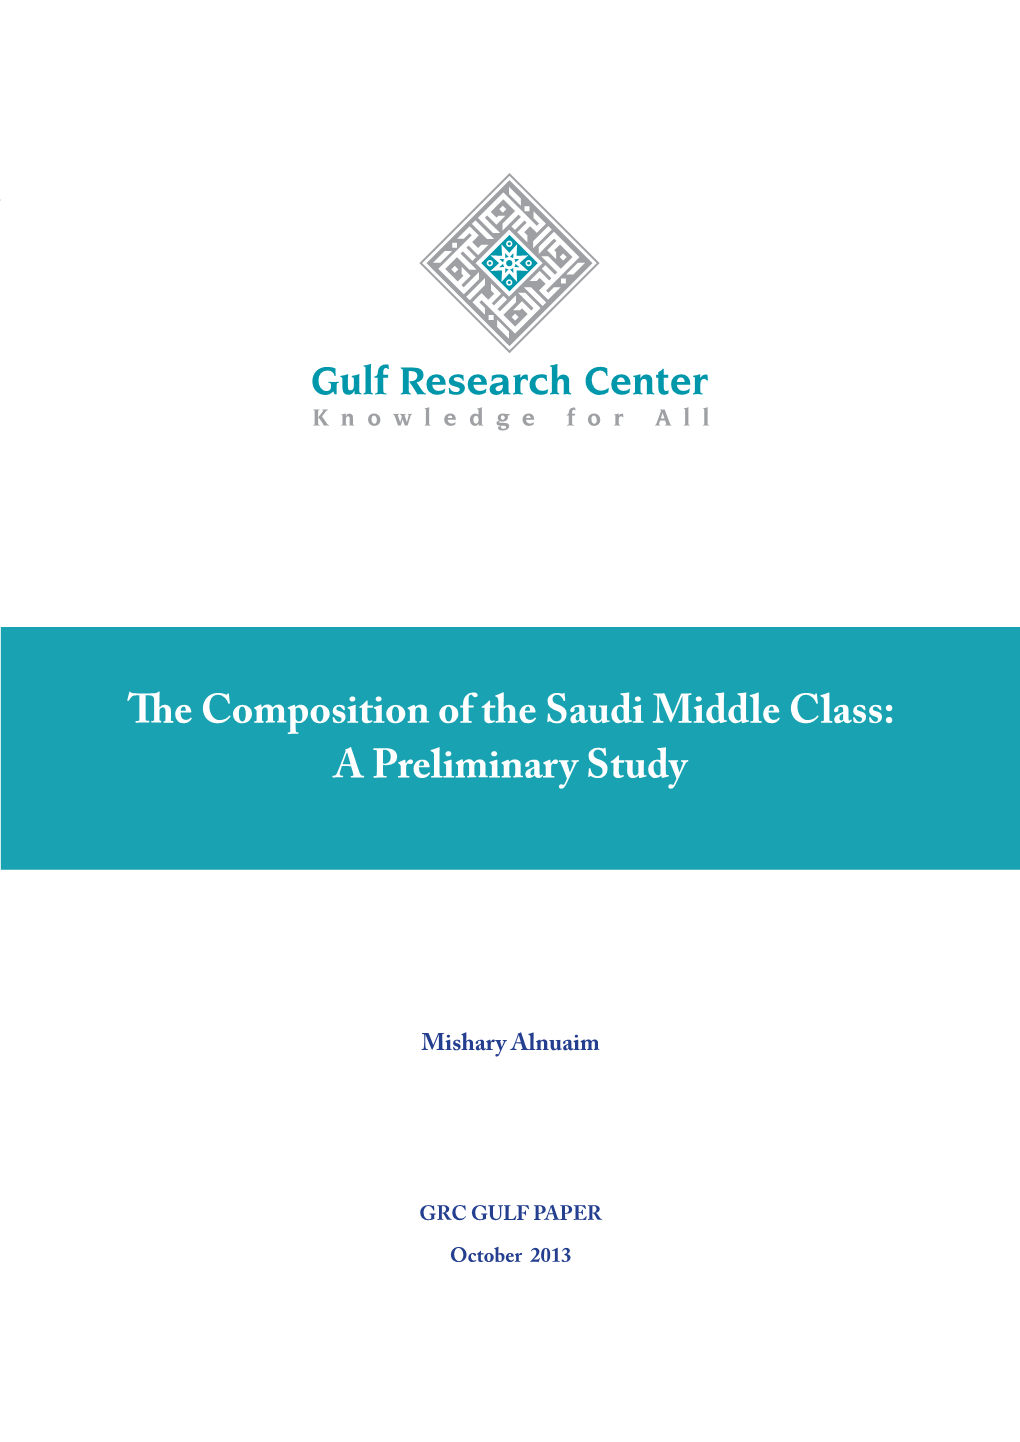 The Composition of the Saudi Middle Class: a Preliminary Study